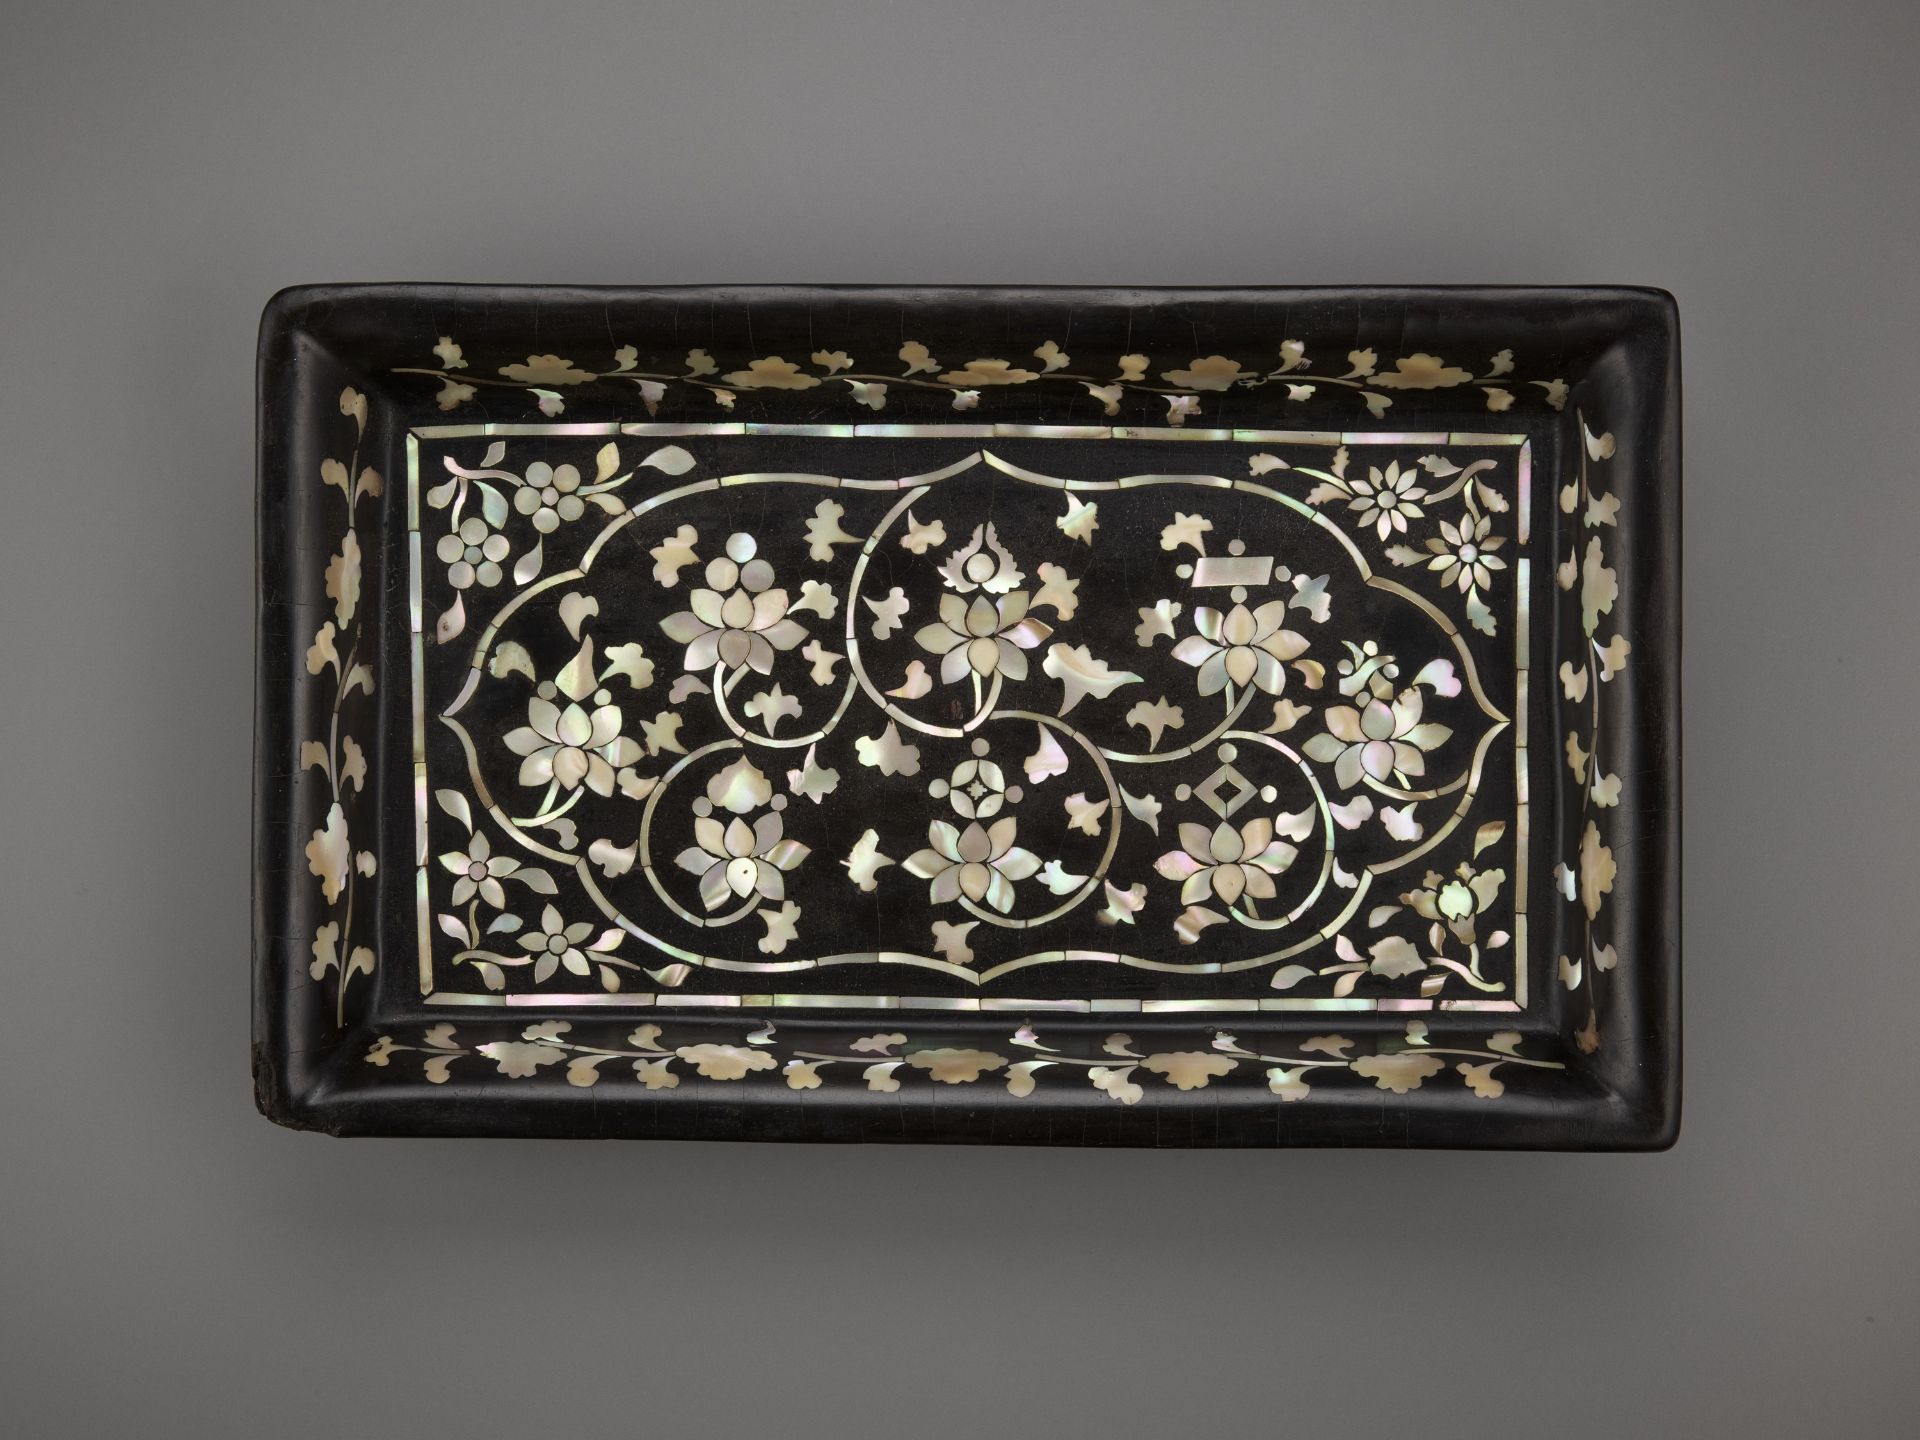 A MOTHER-OF-PEARL-INLAID BLACK LACQUER RECTANGULAR TRAY, JOSEON DYNASTY - Image 2 of 10